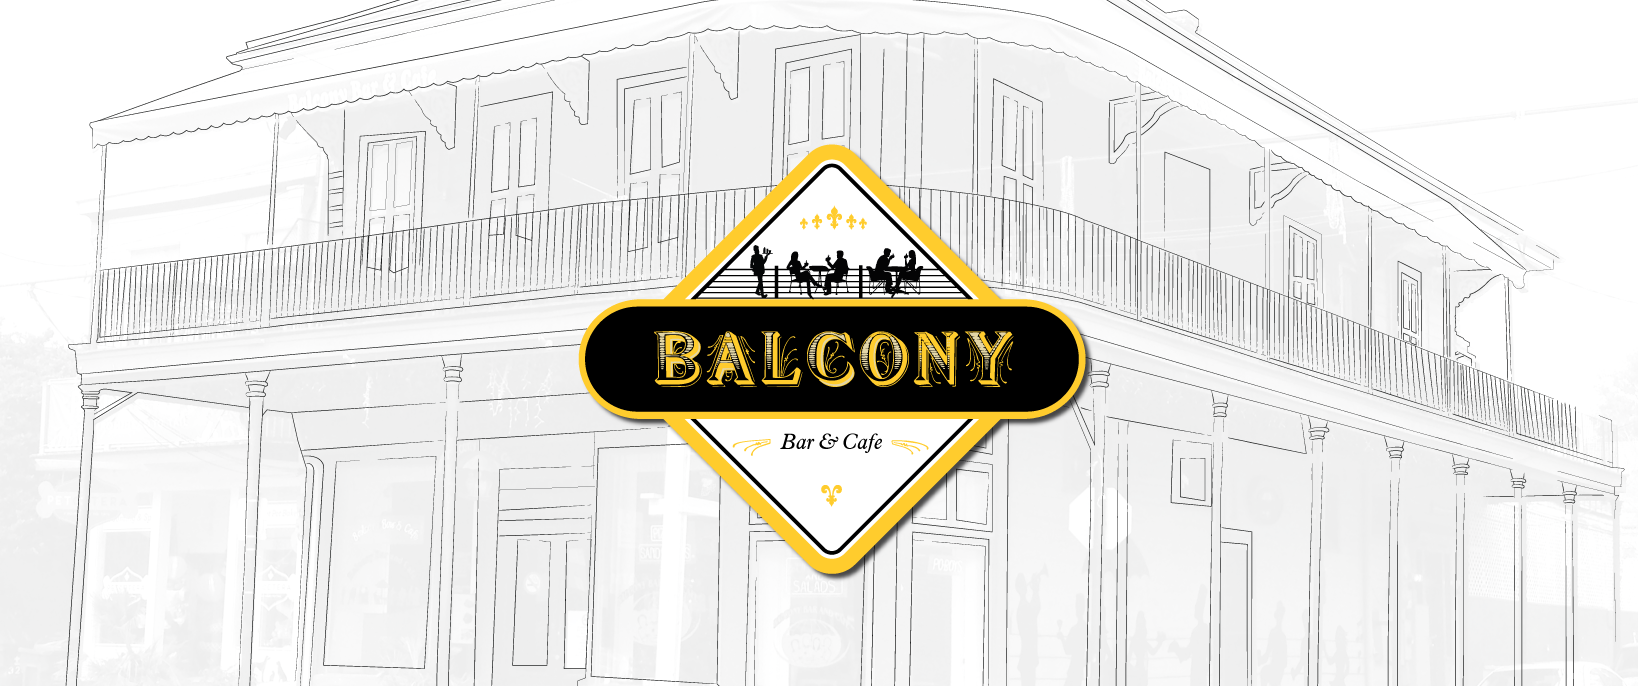 About Balcony Bar & Cafe and reviews